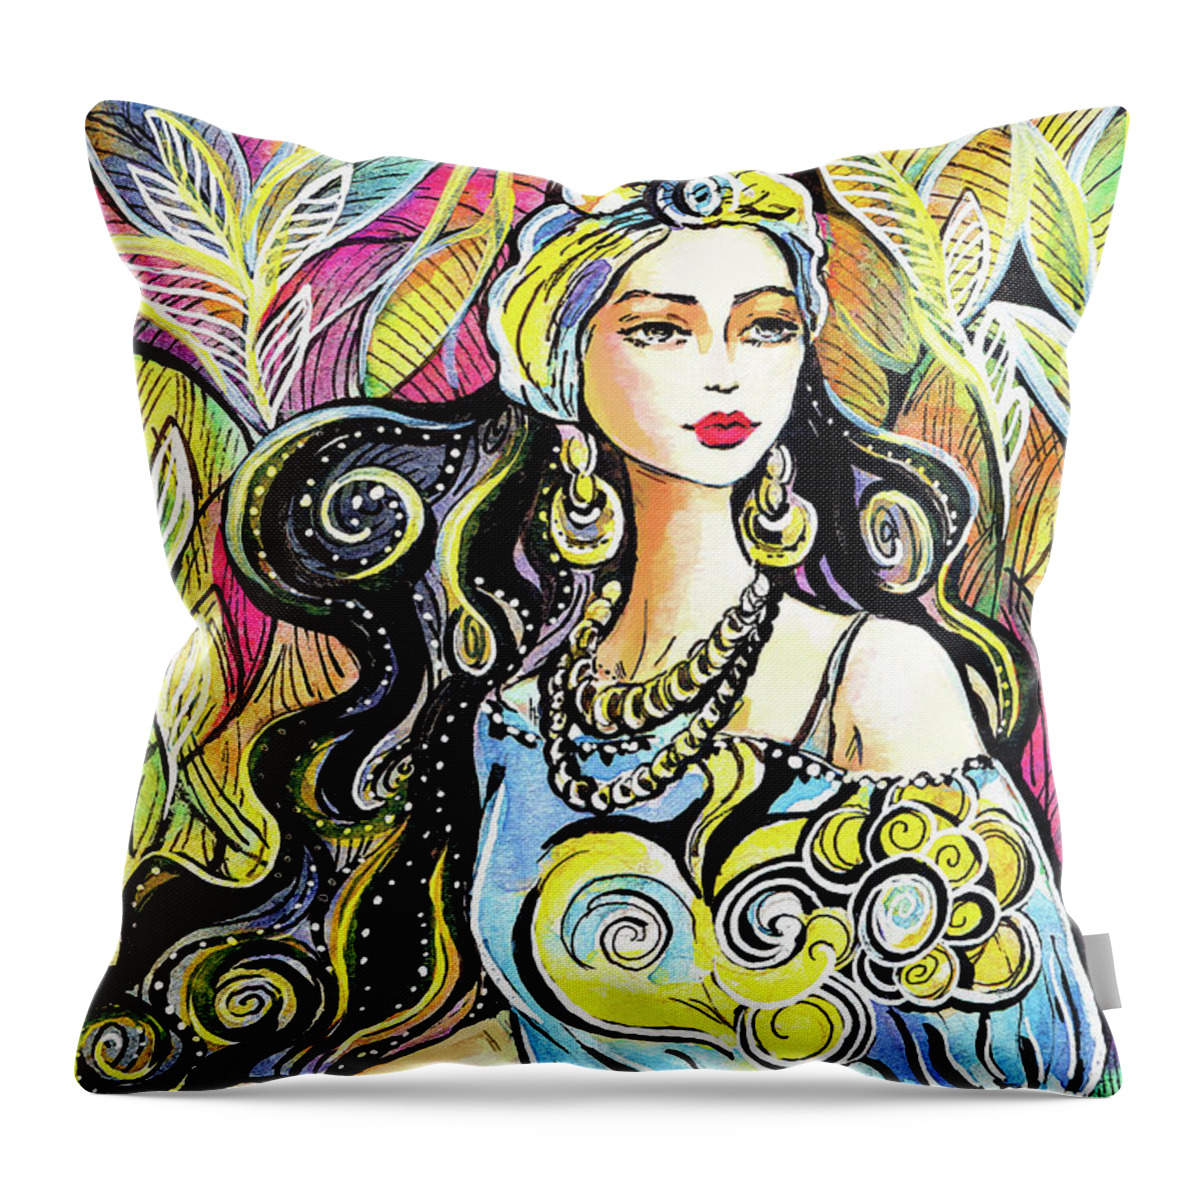 Eastern Woman Throw Pillow featuring the painting Orient Enchantress by Eva Campbell